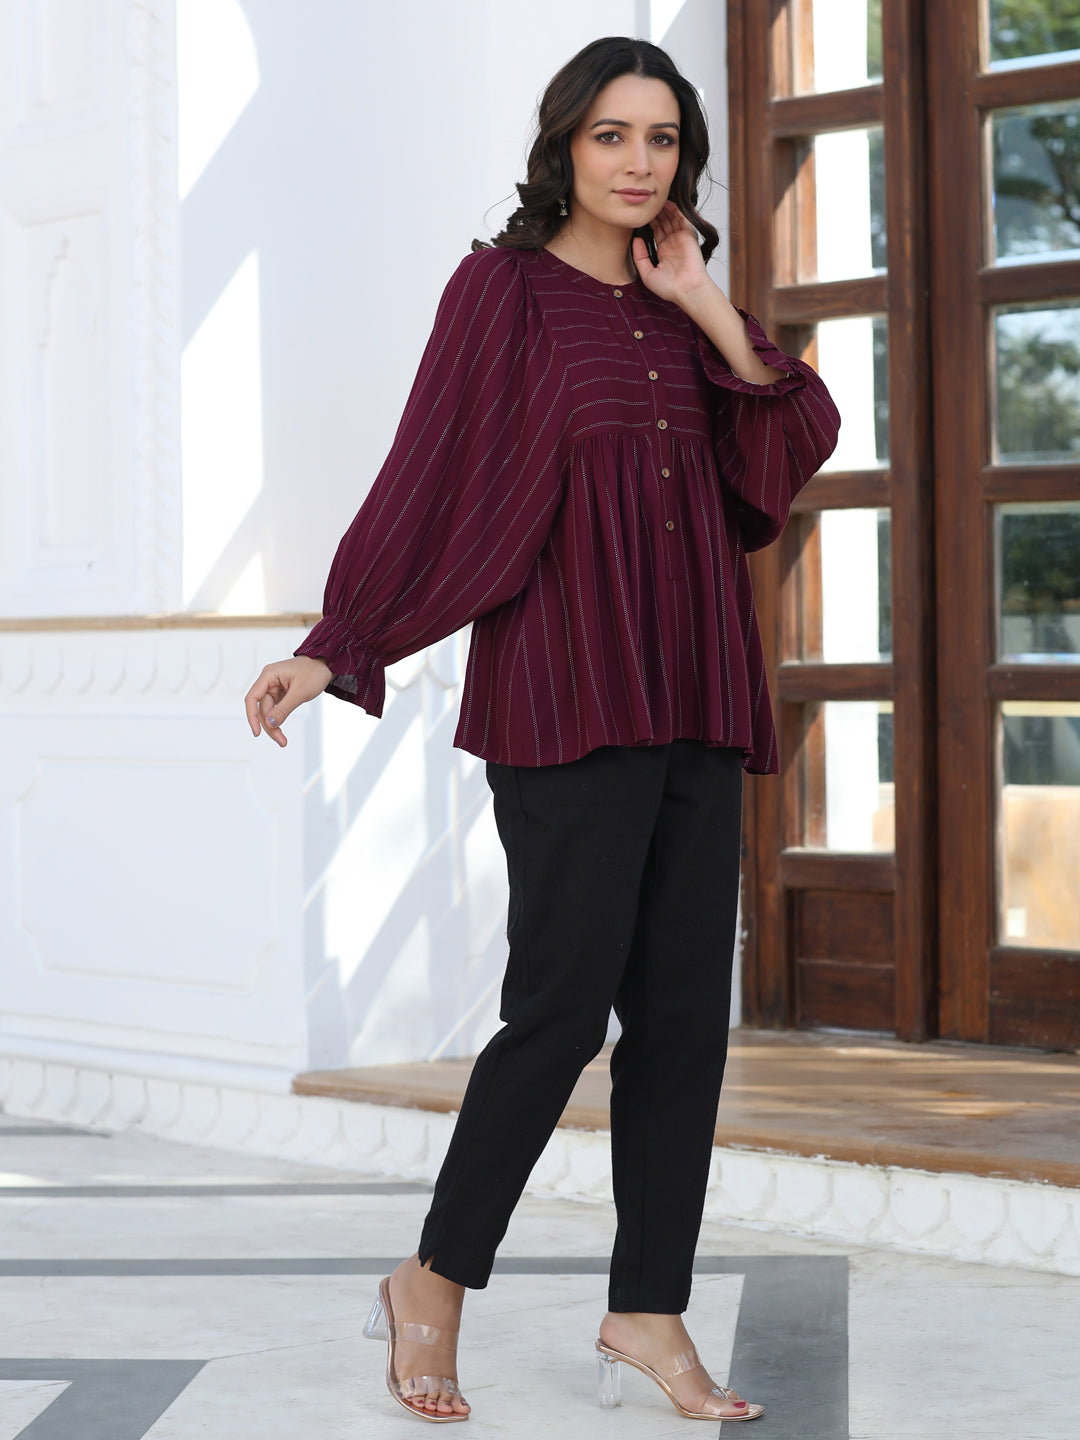 A Maroon Self Weave Rayon Lurex Gathered Top With Elasticated Gathered Sleeves With Black Pants